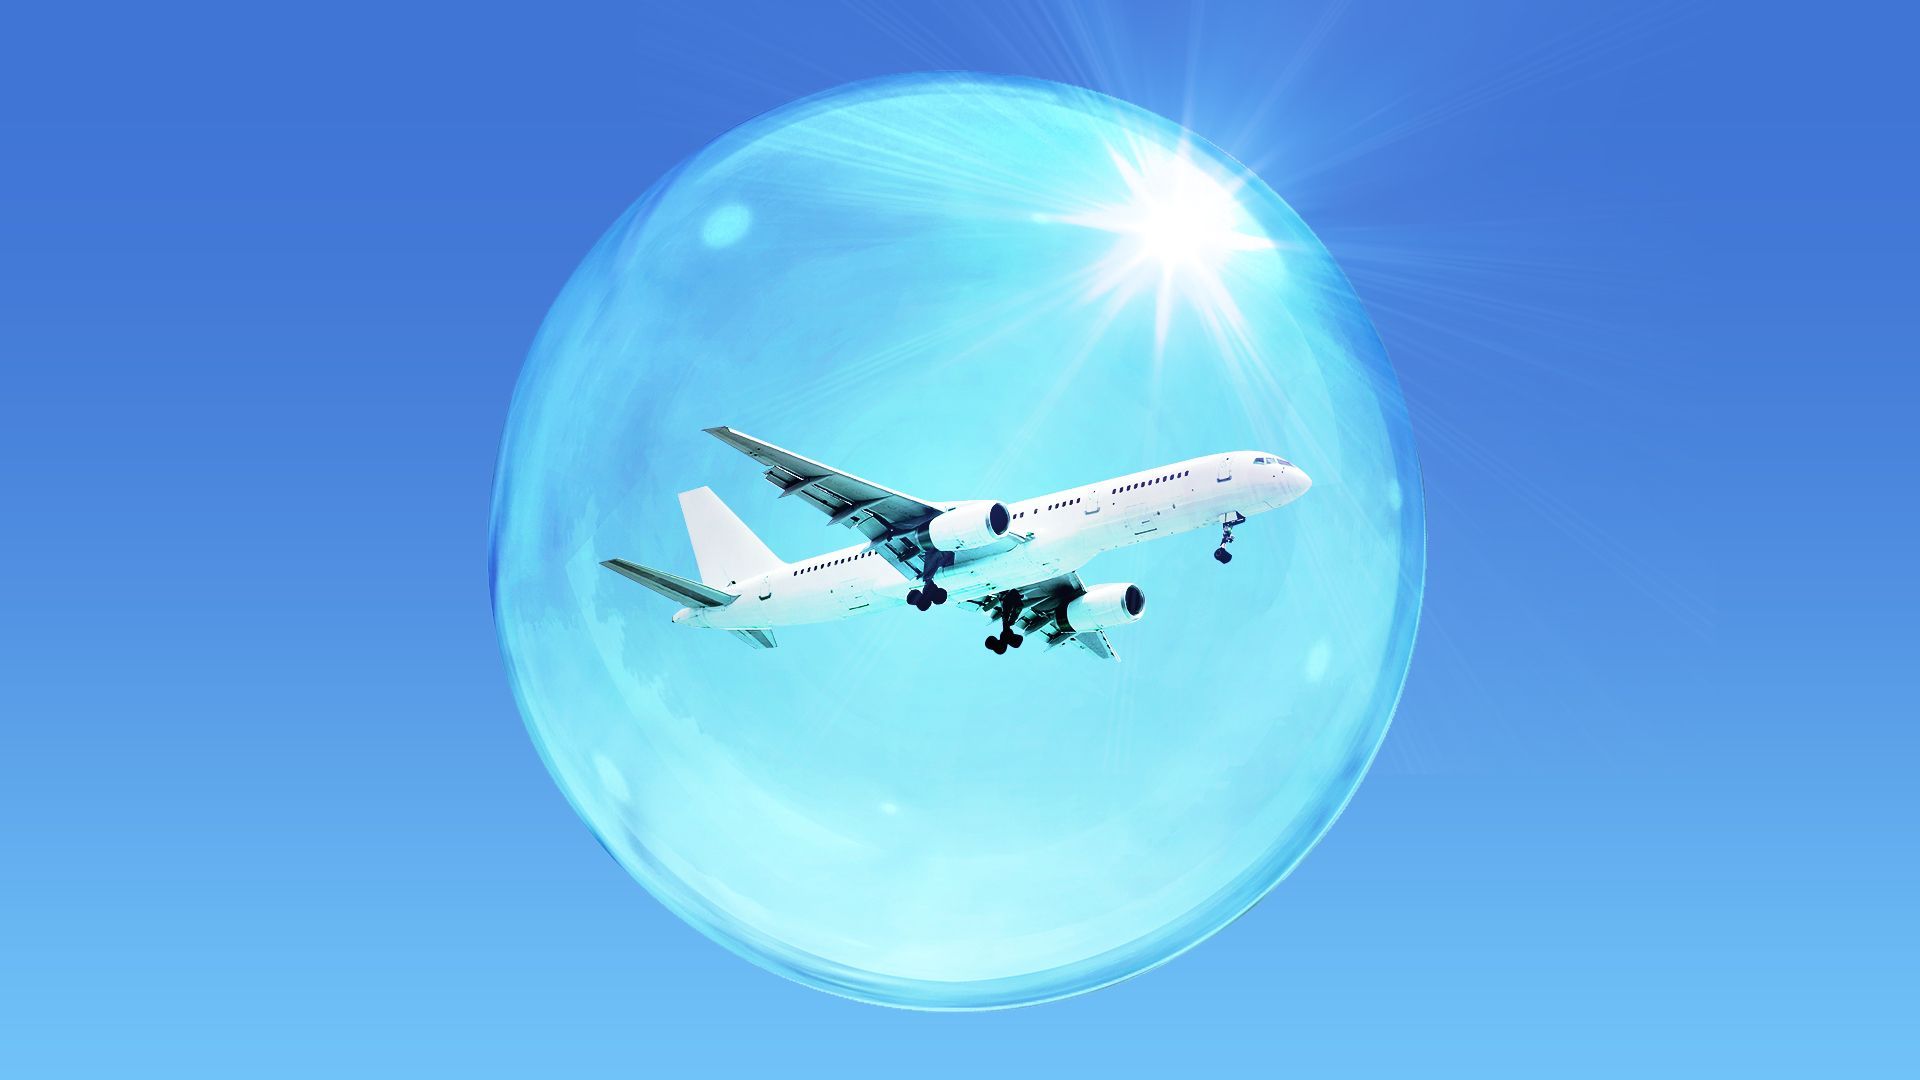 Illustration of a plane in a bubble